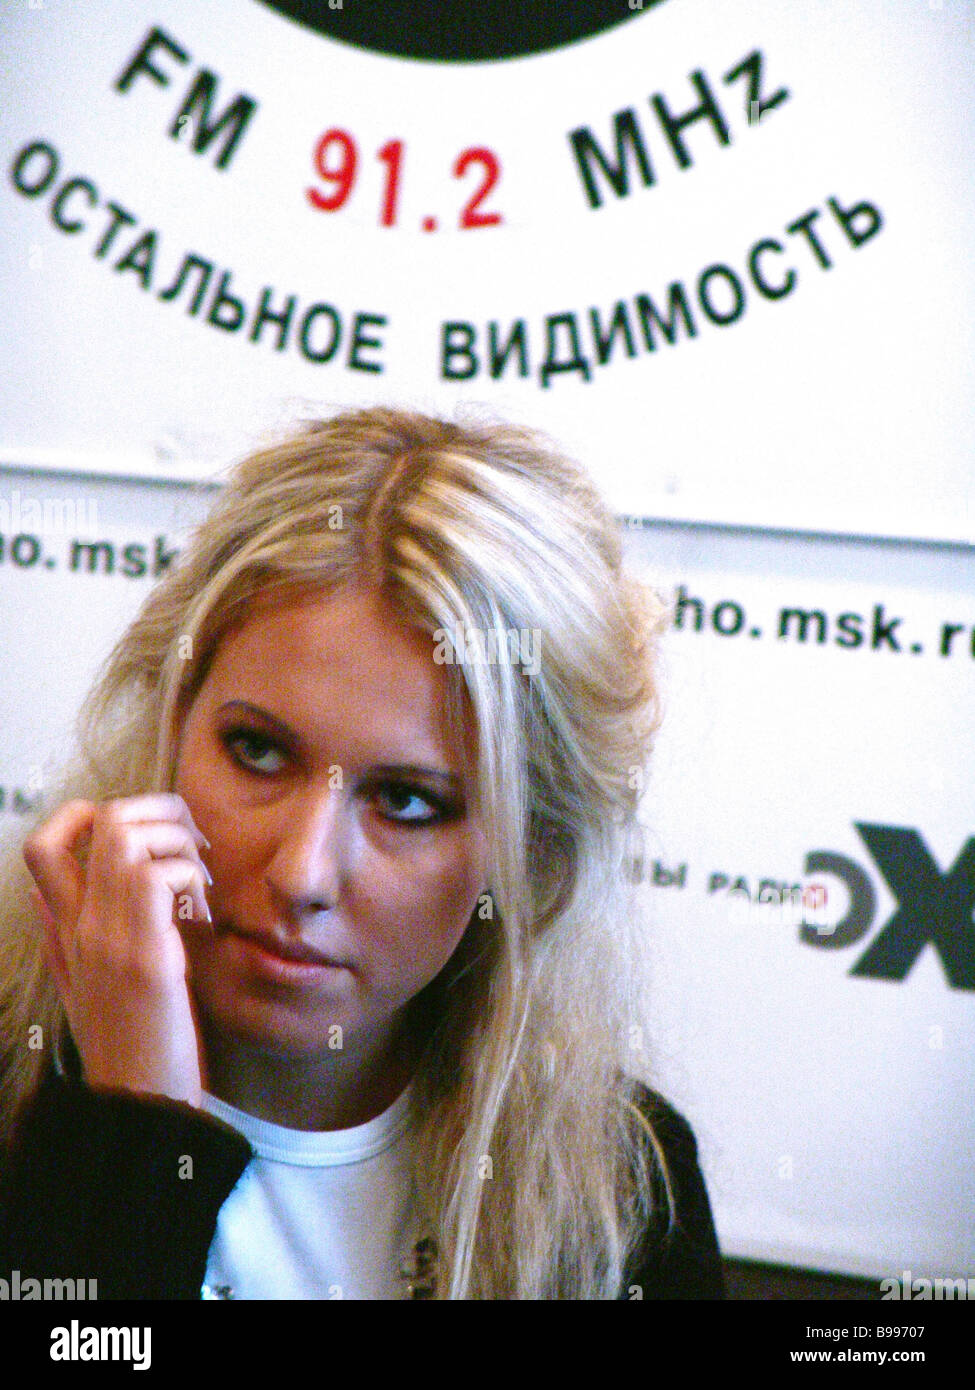 TV anchor Ksenia Sobchak in a Moscow Echo radio live cast Stock Photo